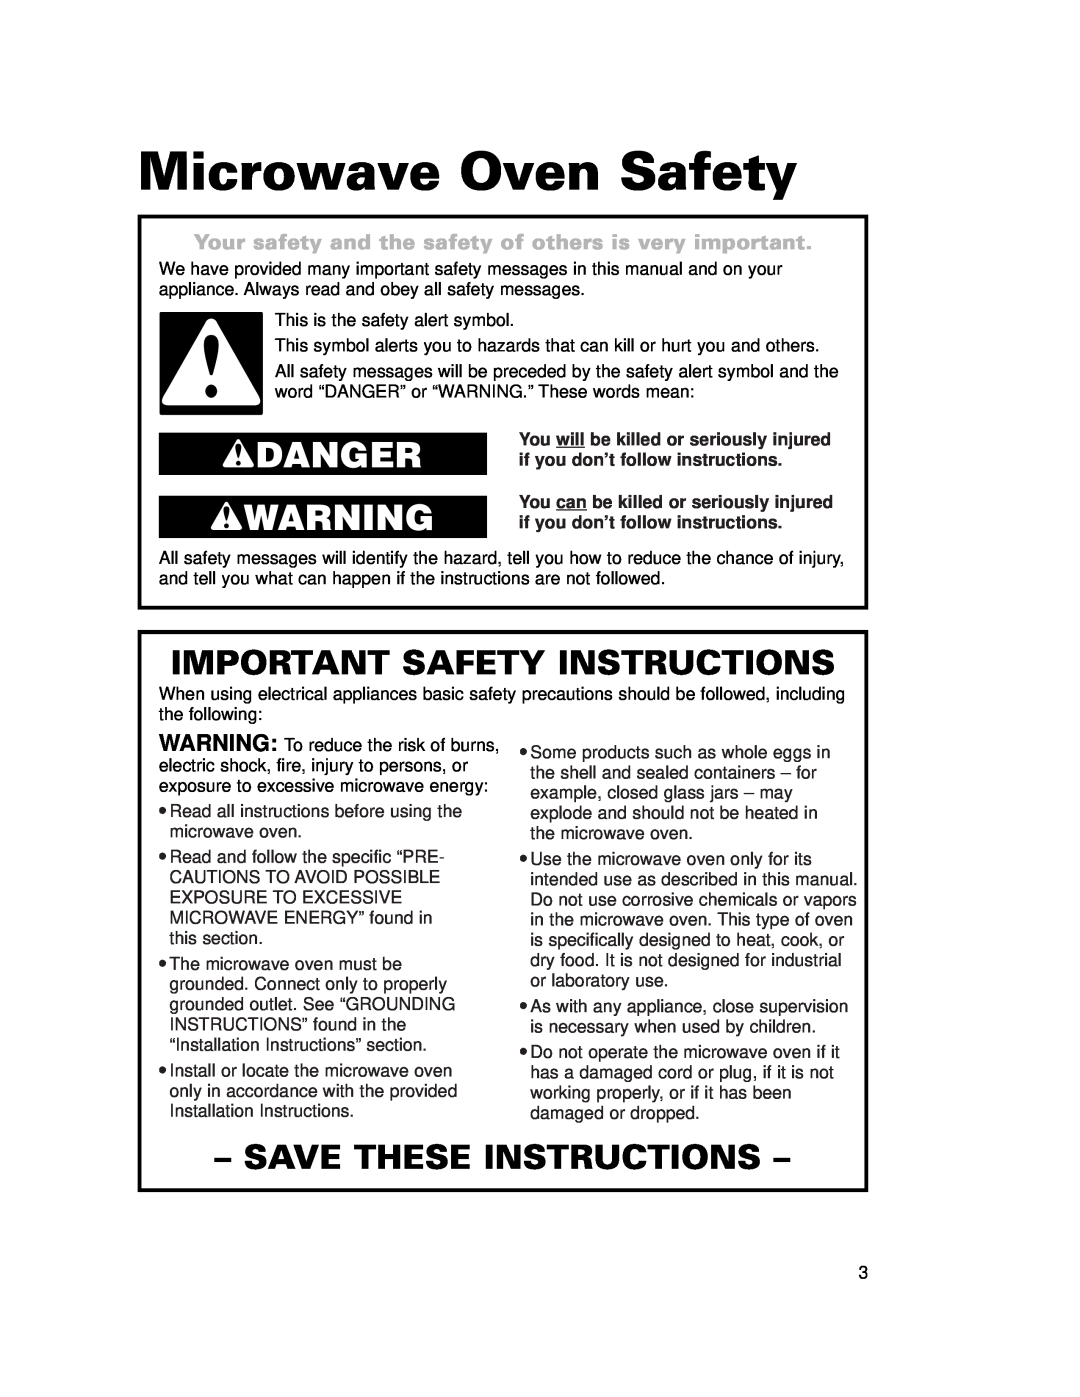 Whirlpool CMT102SG Microwave Oven Safety, wDANGER wWARNING, Important Safety Instructions, Save These Instructions 